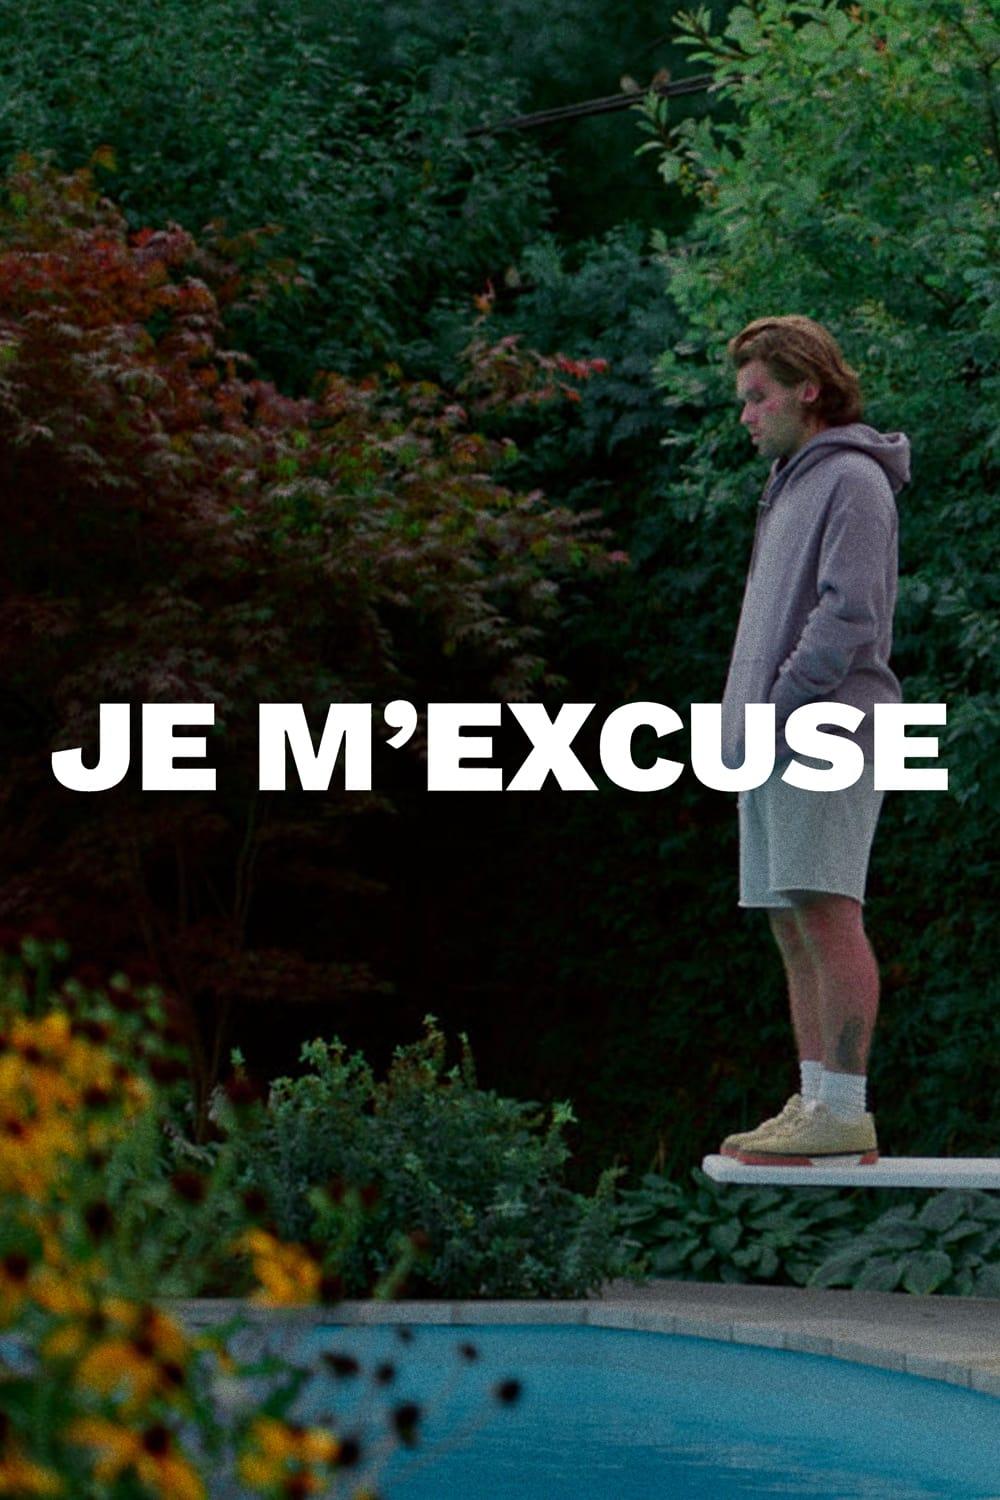 Je m'excuse poster